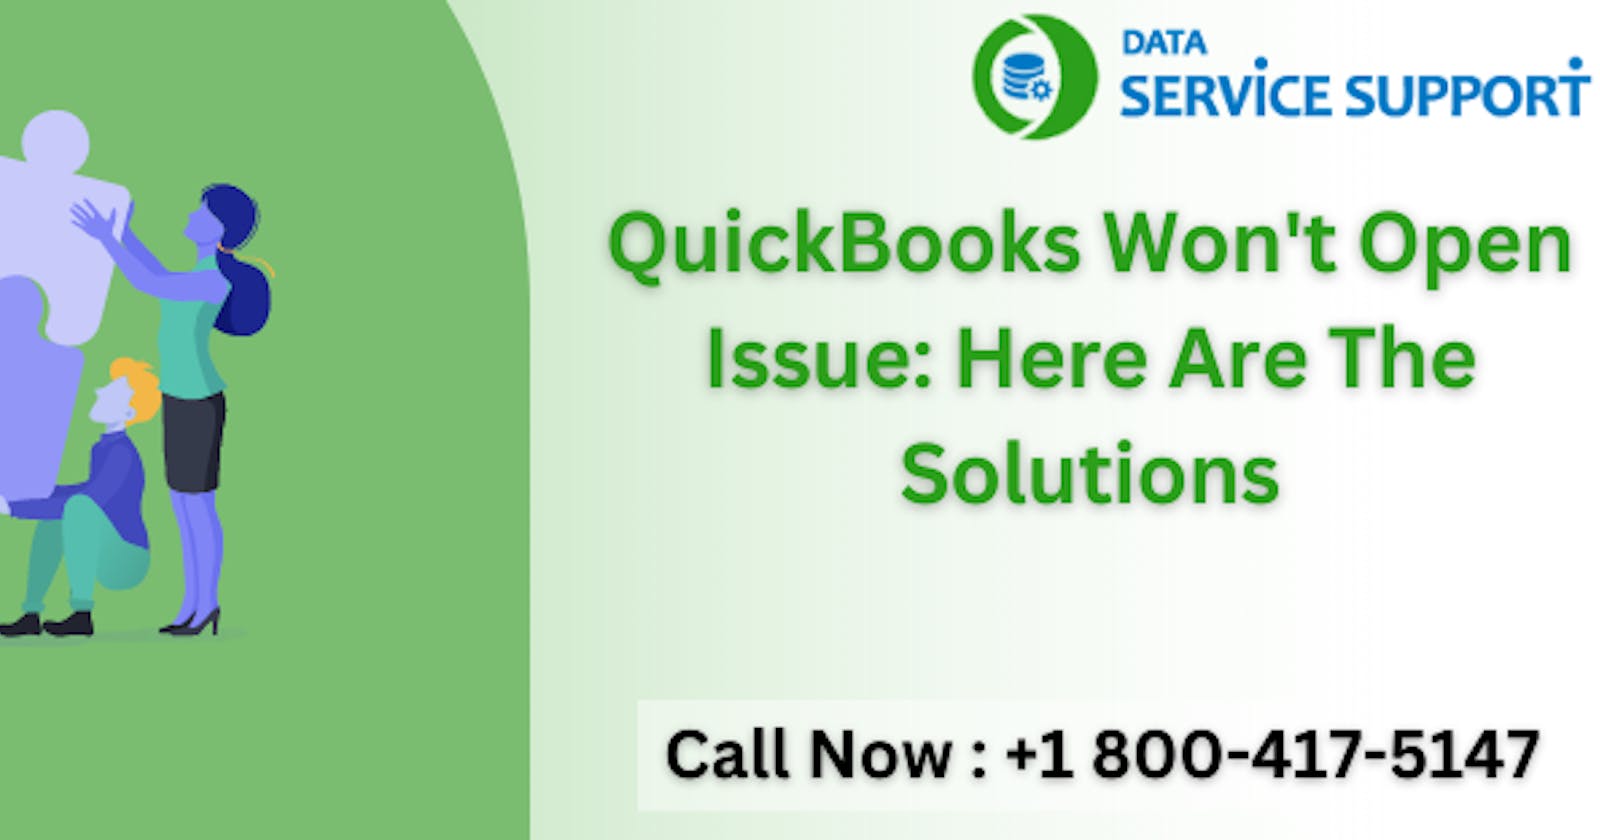 QuickBooks Won't Open Issue: Here Are The Solutions